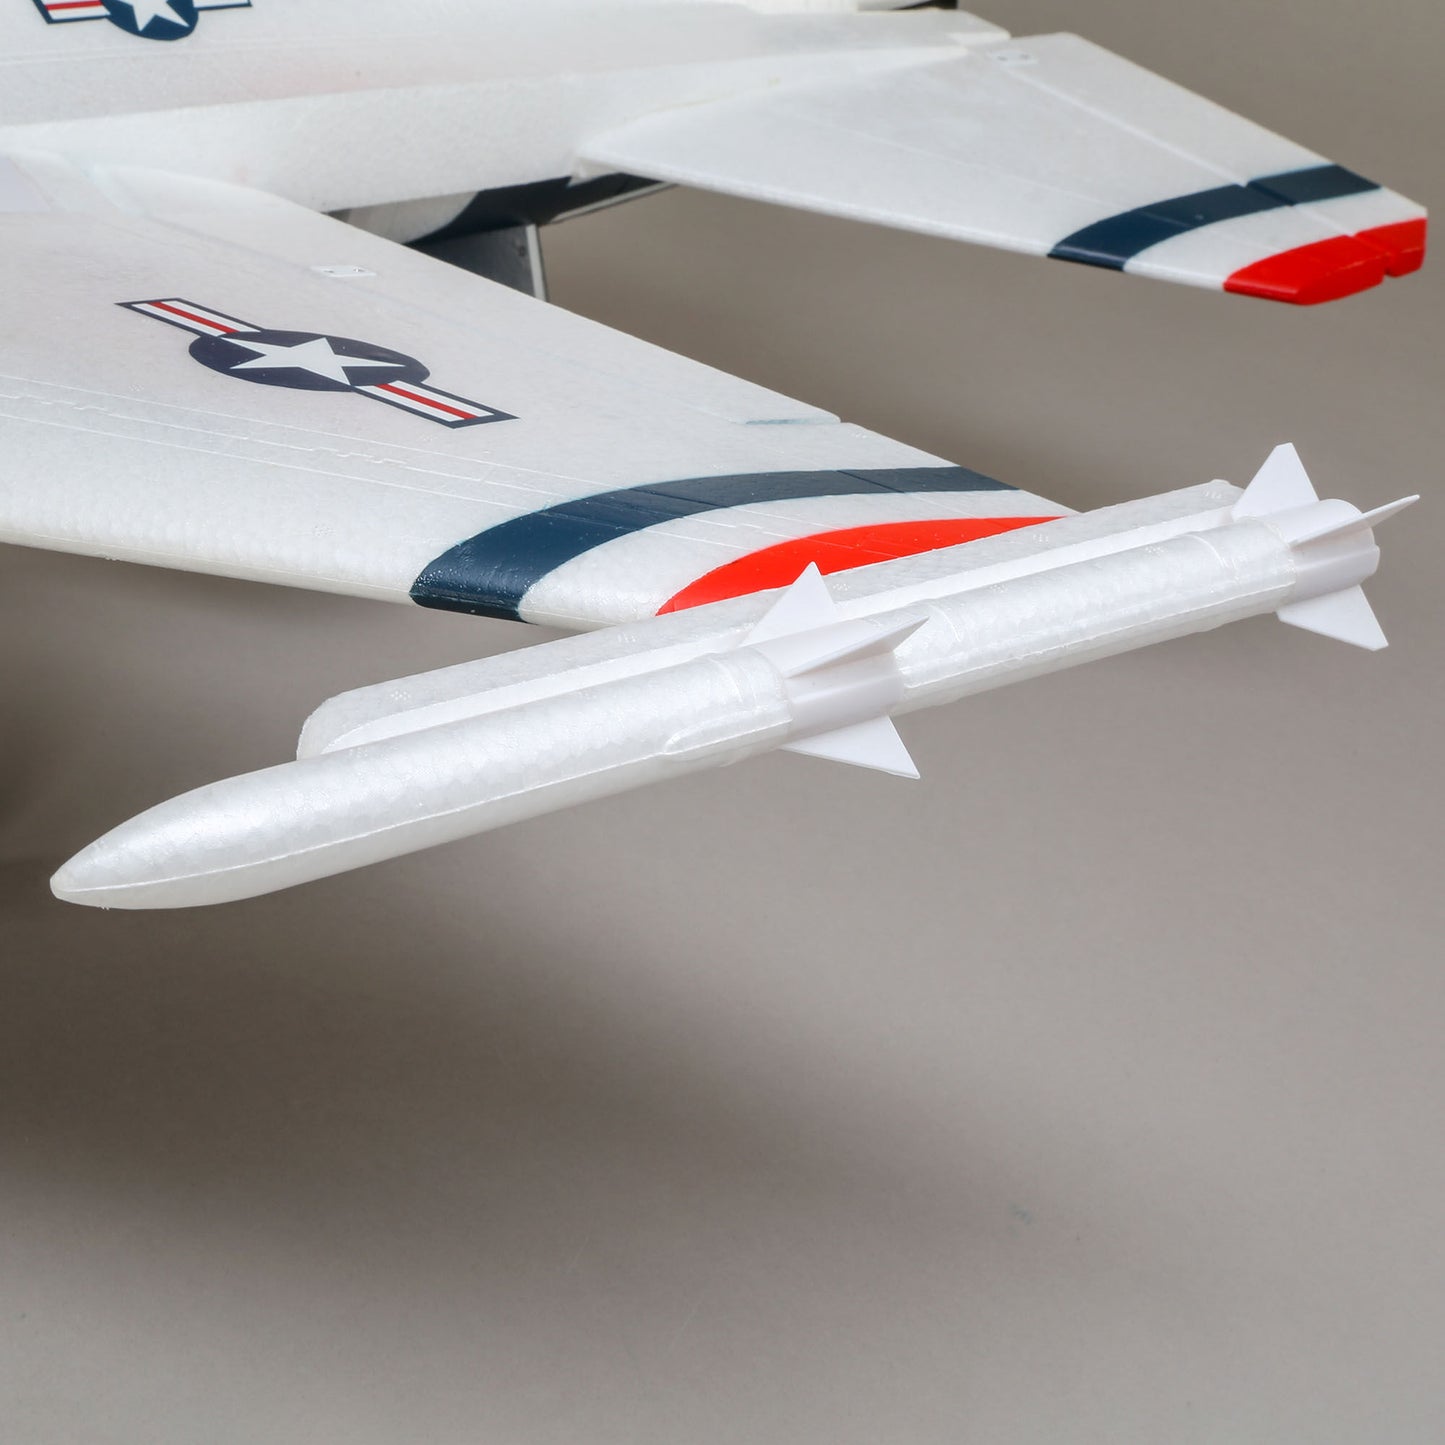 E-Flite F-16 Thunderbirds 70mm EDF Jet BNF Basic with AS3X and SAFE Select